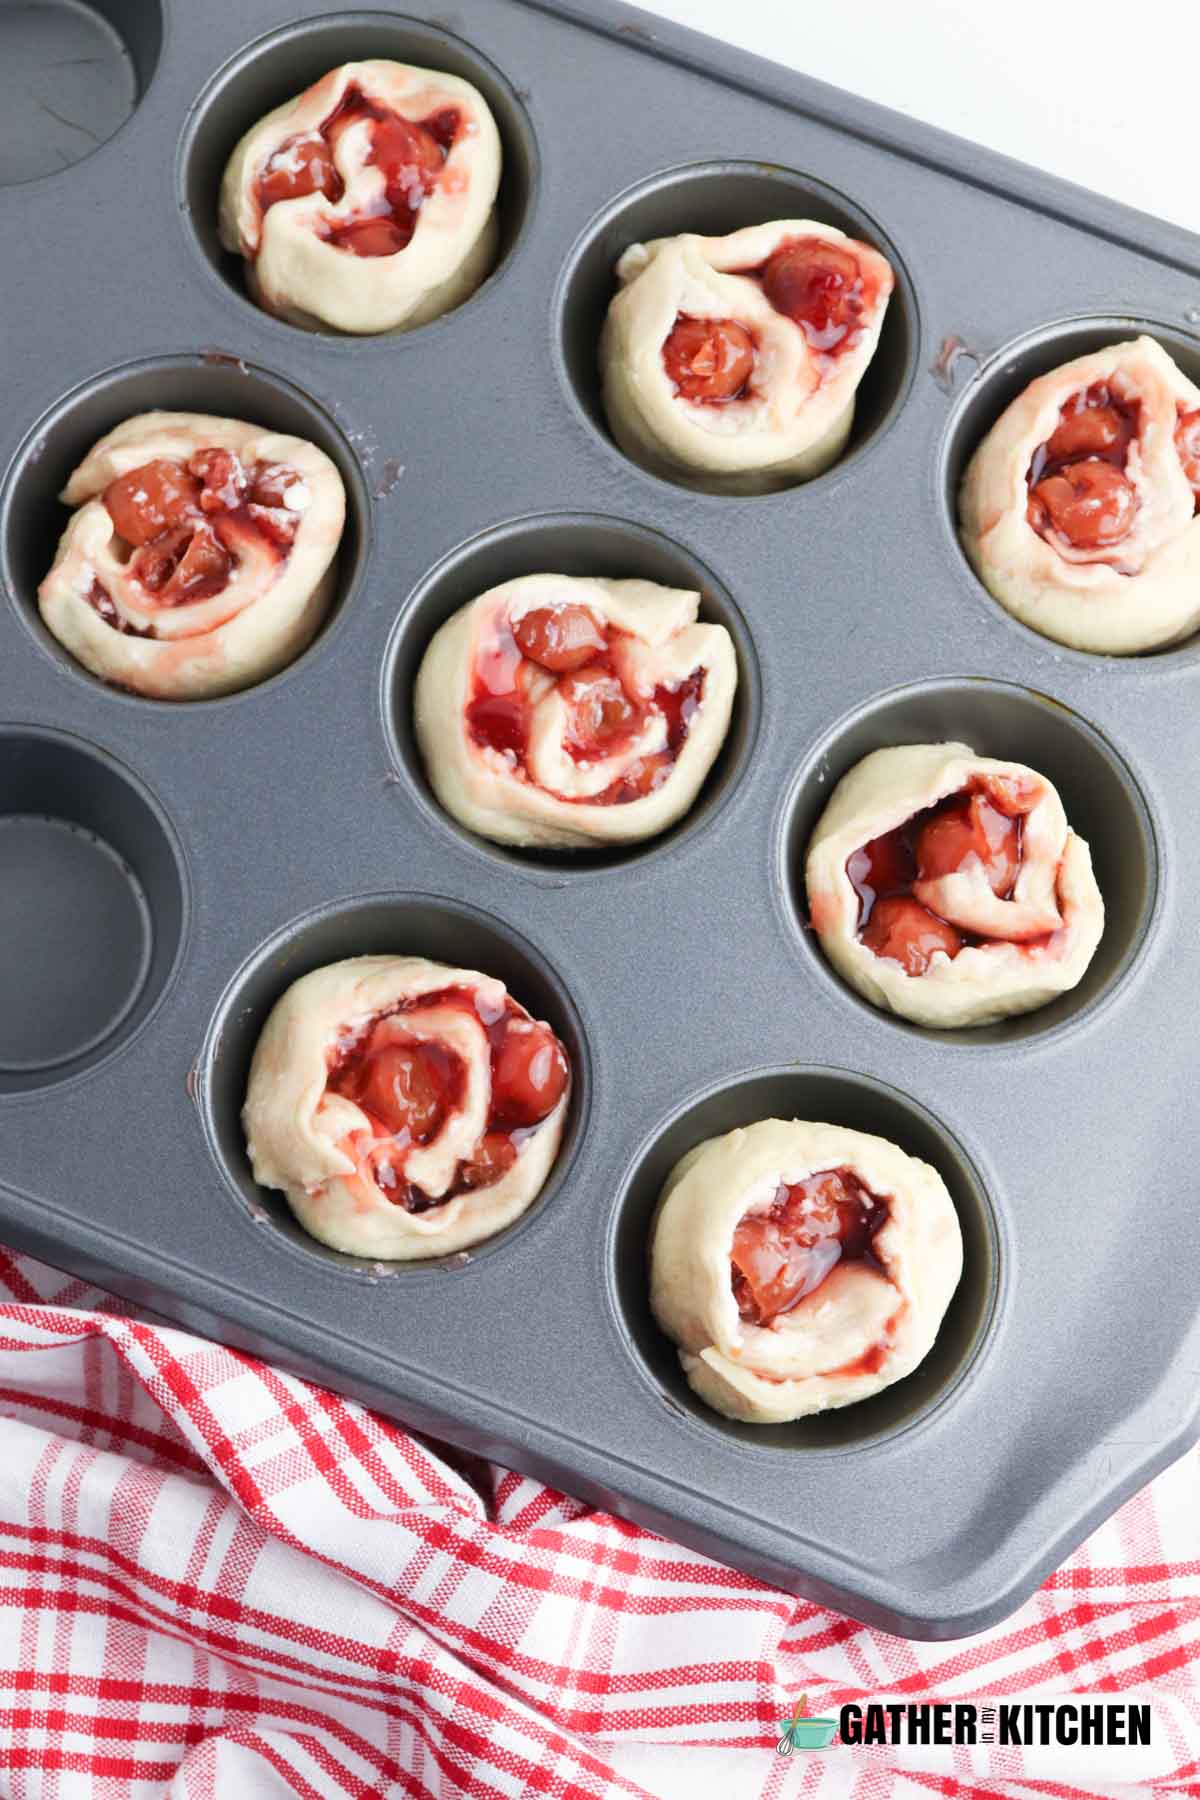 Crescent dough roll slices in cups of muffin tins and you can see the filling inside the rolls of dough.